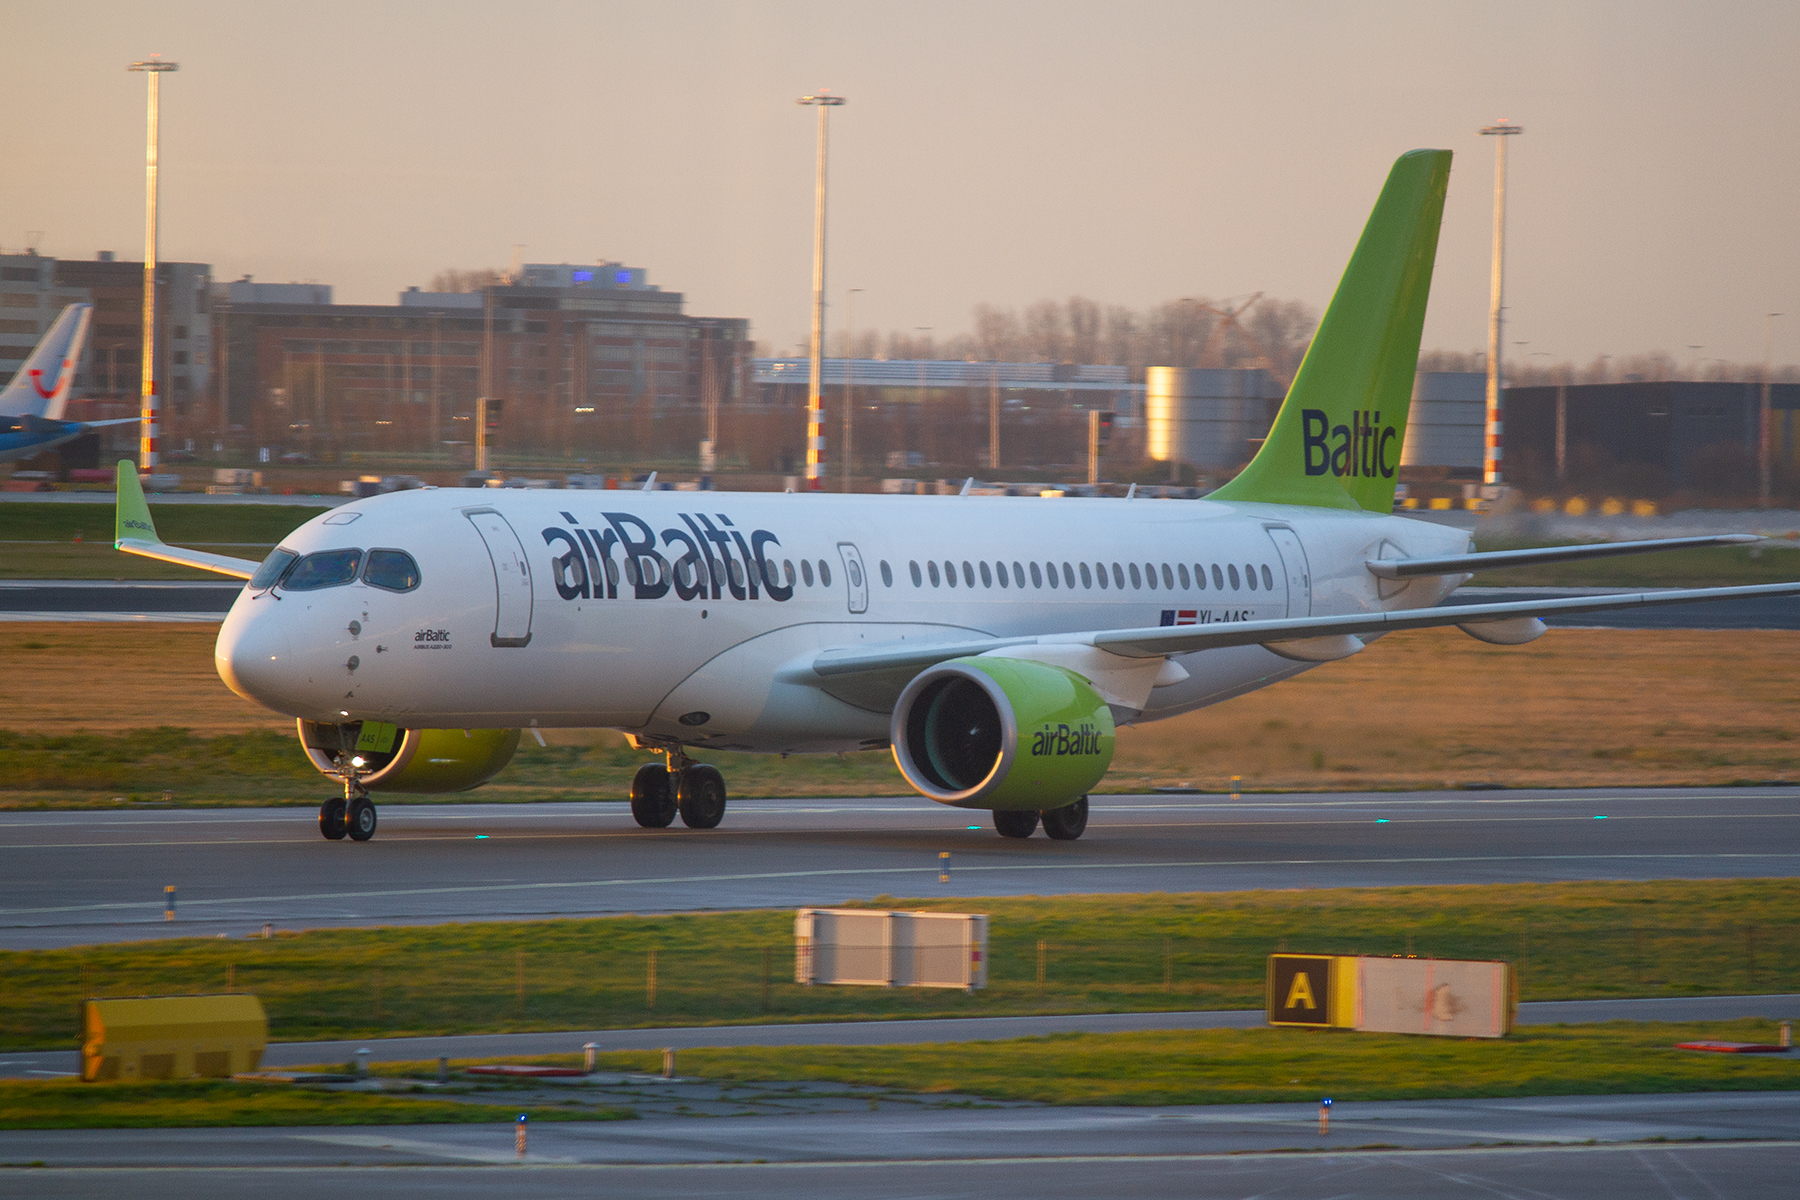 Air Baltic Airbus A220-300 YL-AAS at Schiphol